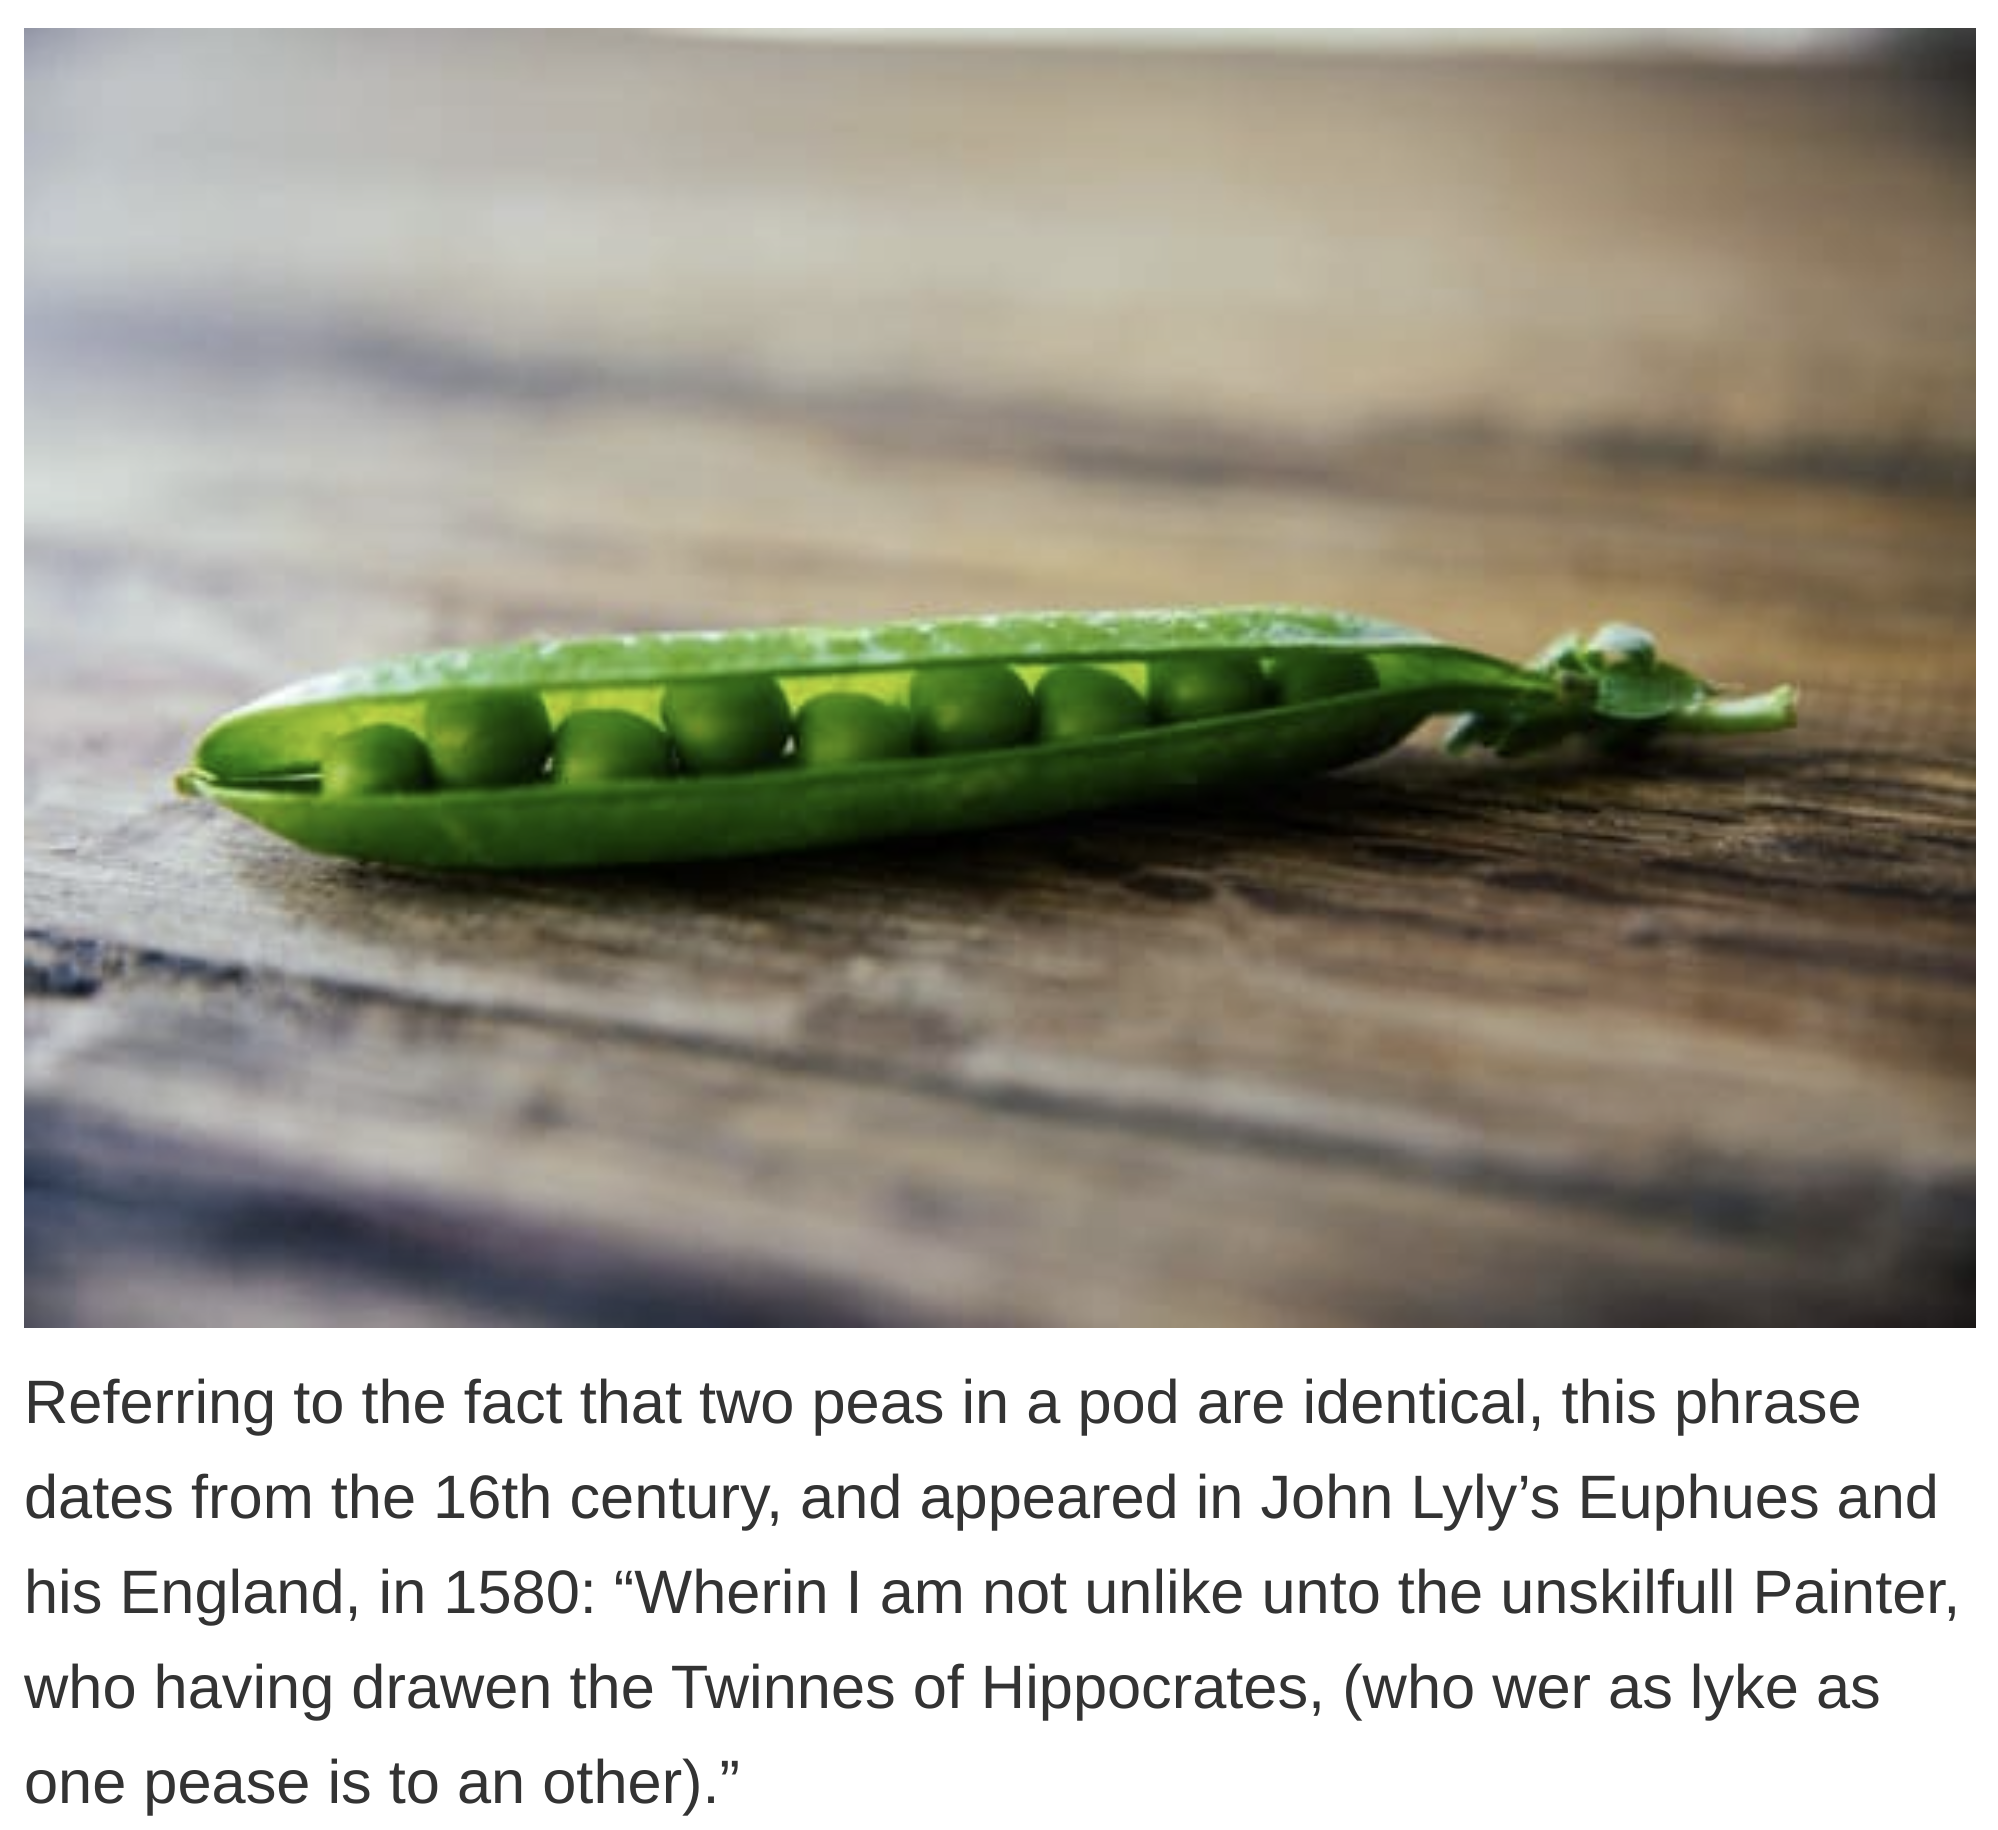 etymology english language - Referring to the fact that two peas in a pod are identical, this phrase dates from the 16th century, and appeared in John Lyly's Euphues and his England, in 1580